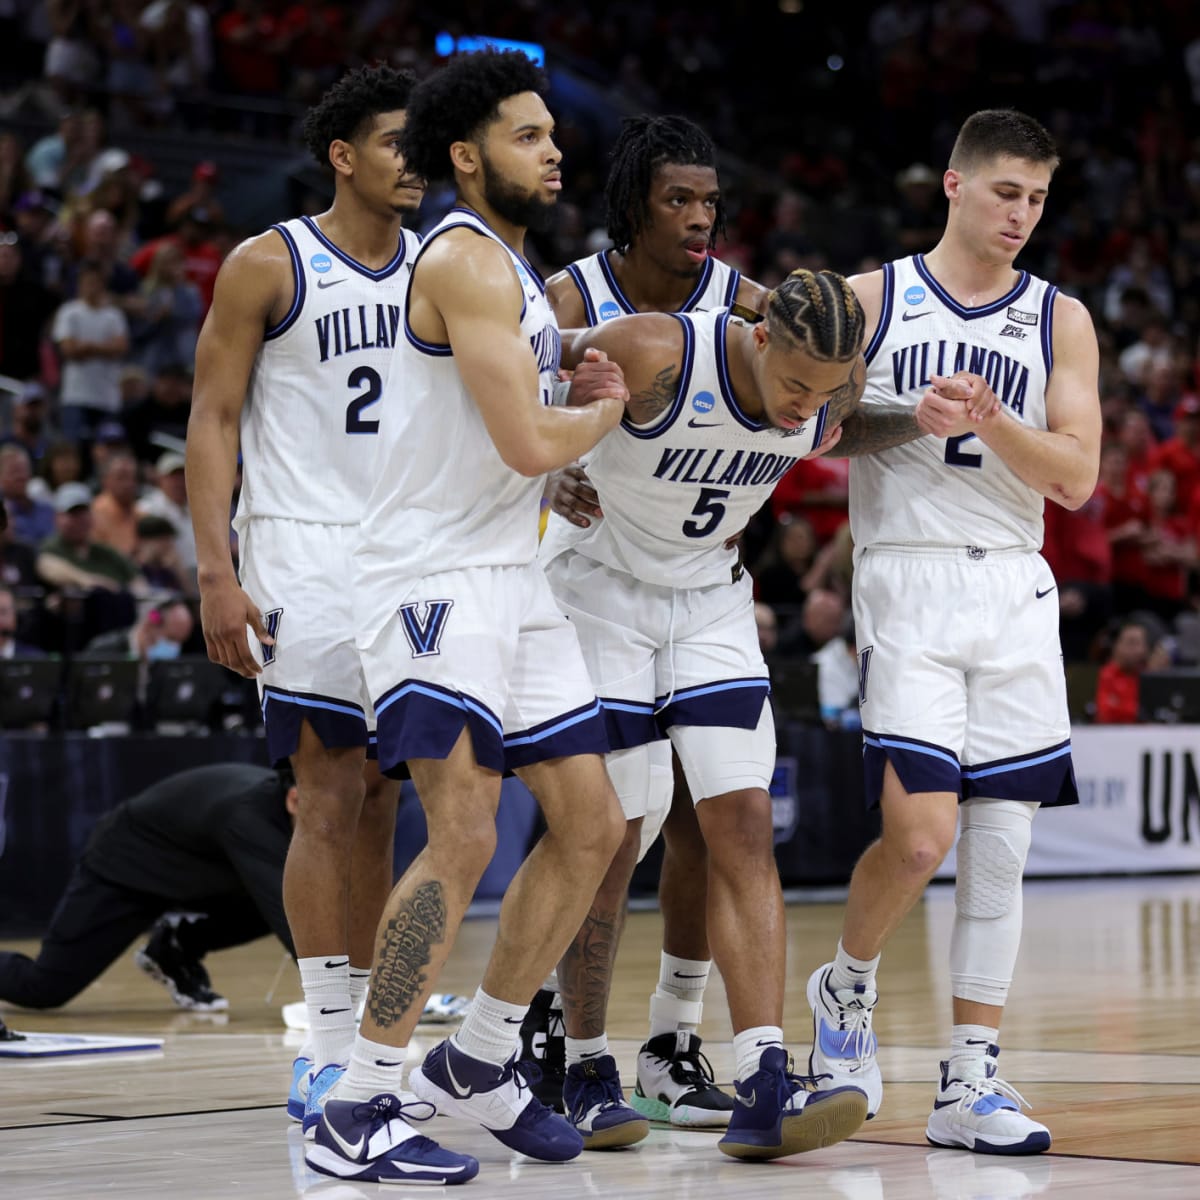 Villanovas Justin Moore Leaves Game With Potentially Serious Injury